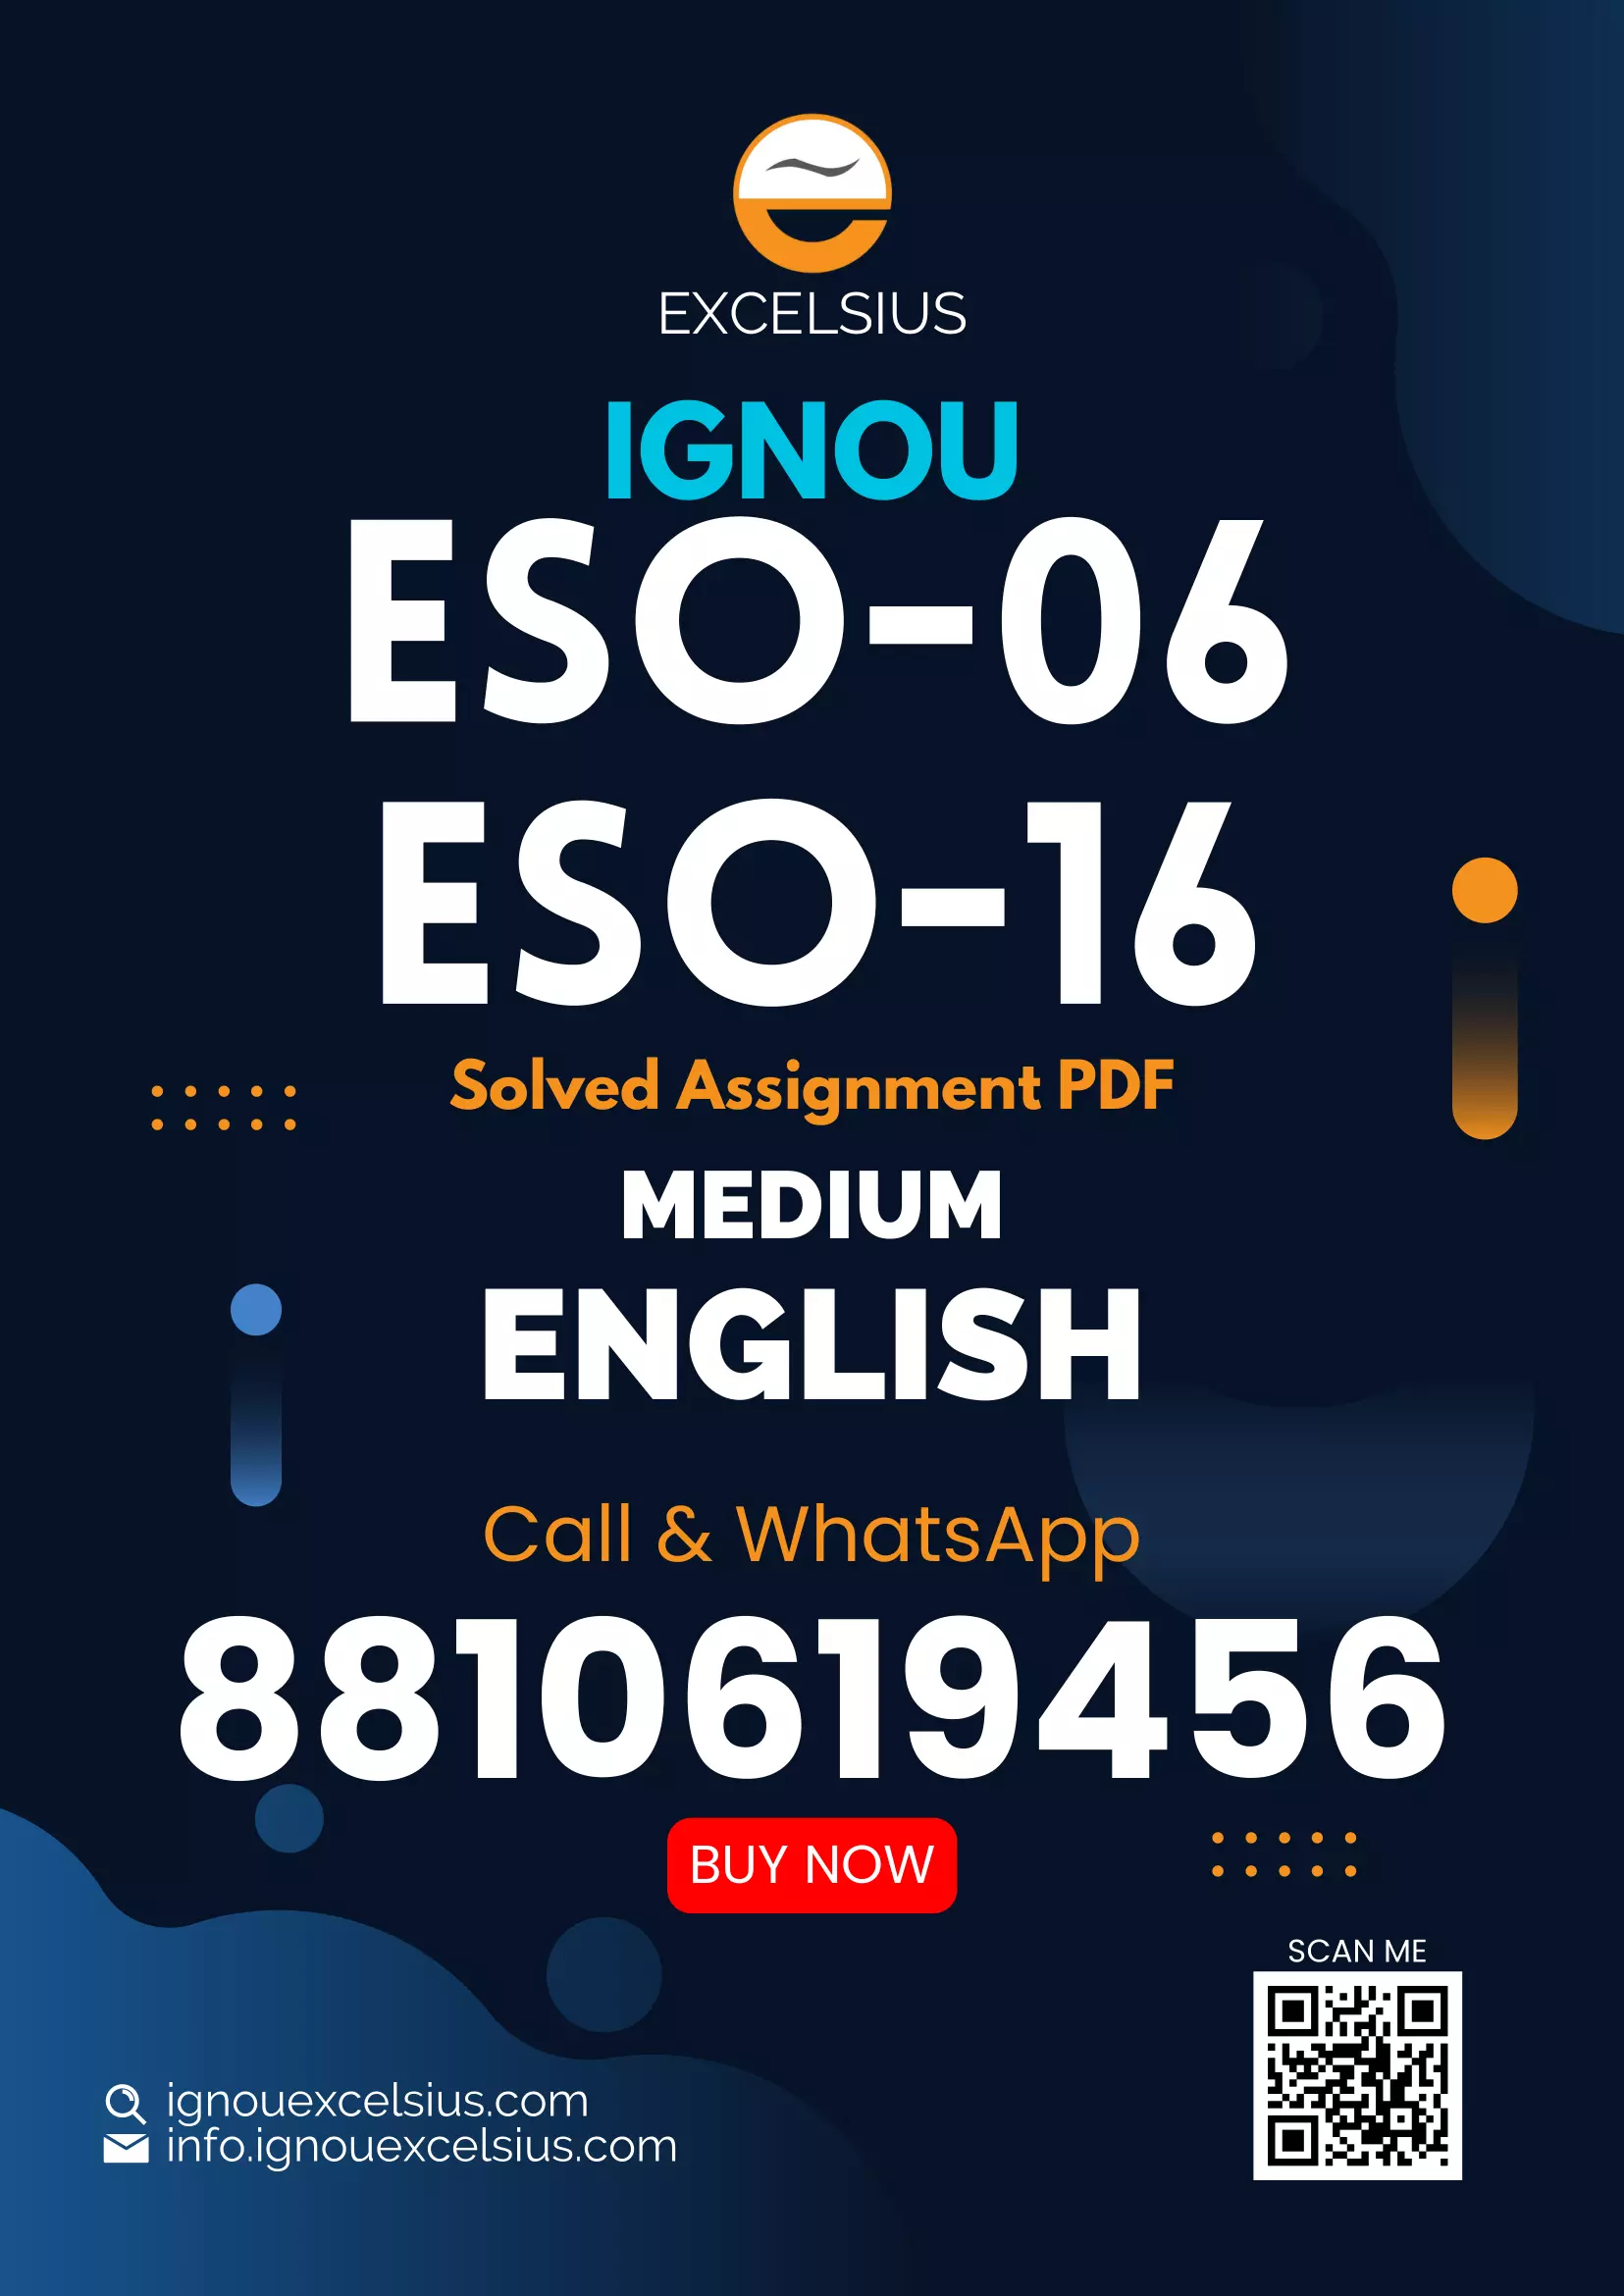 IGNOU ESO-06/16 - Social Problems in India, Latest Solved Assignment-July 2022 – January 2023